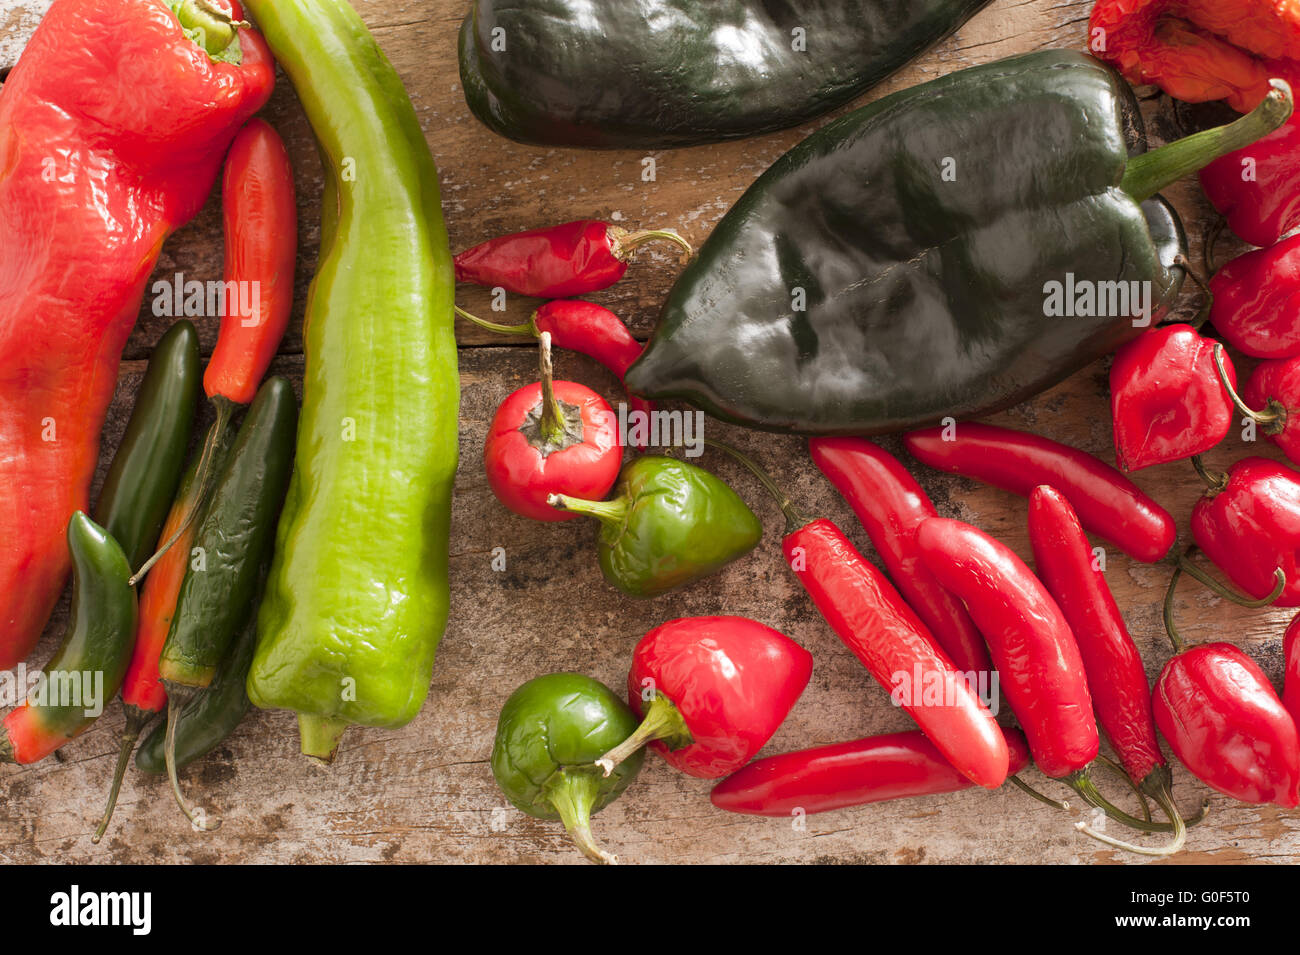 Red and Green Chili Peppers on a Wooden Table Stock Photo